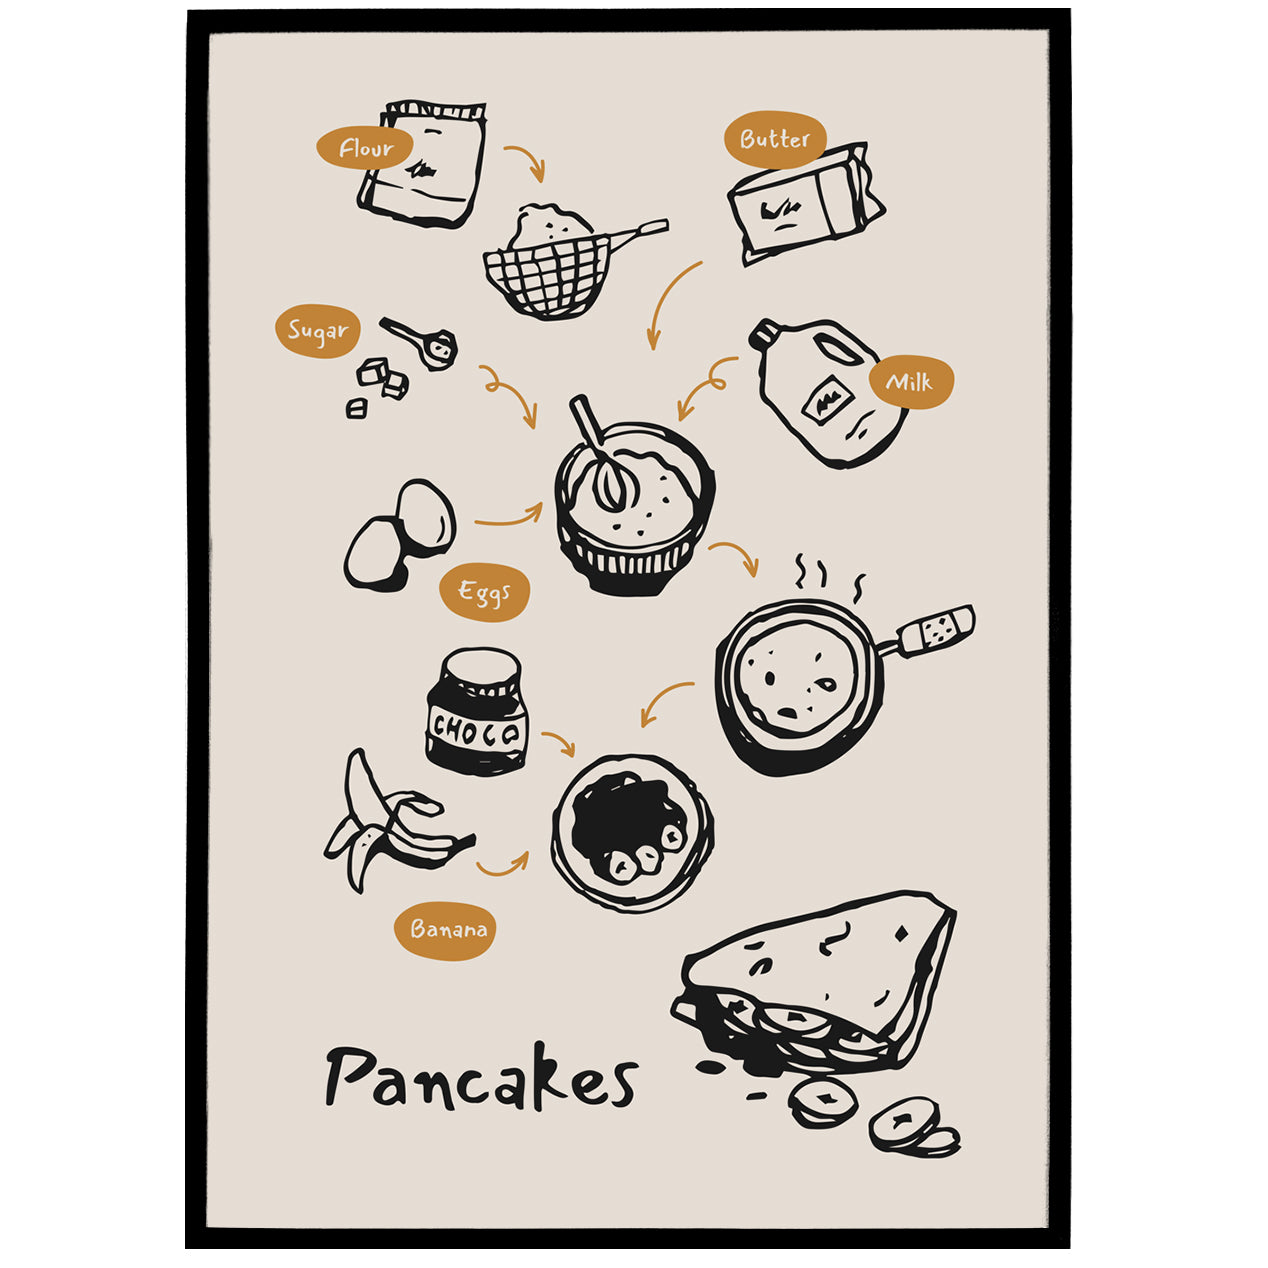 Good Old Fashioned Pancakes Recipe Poster